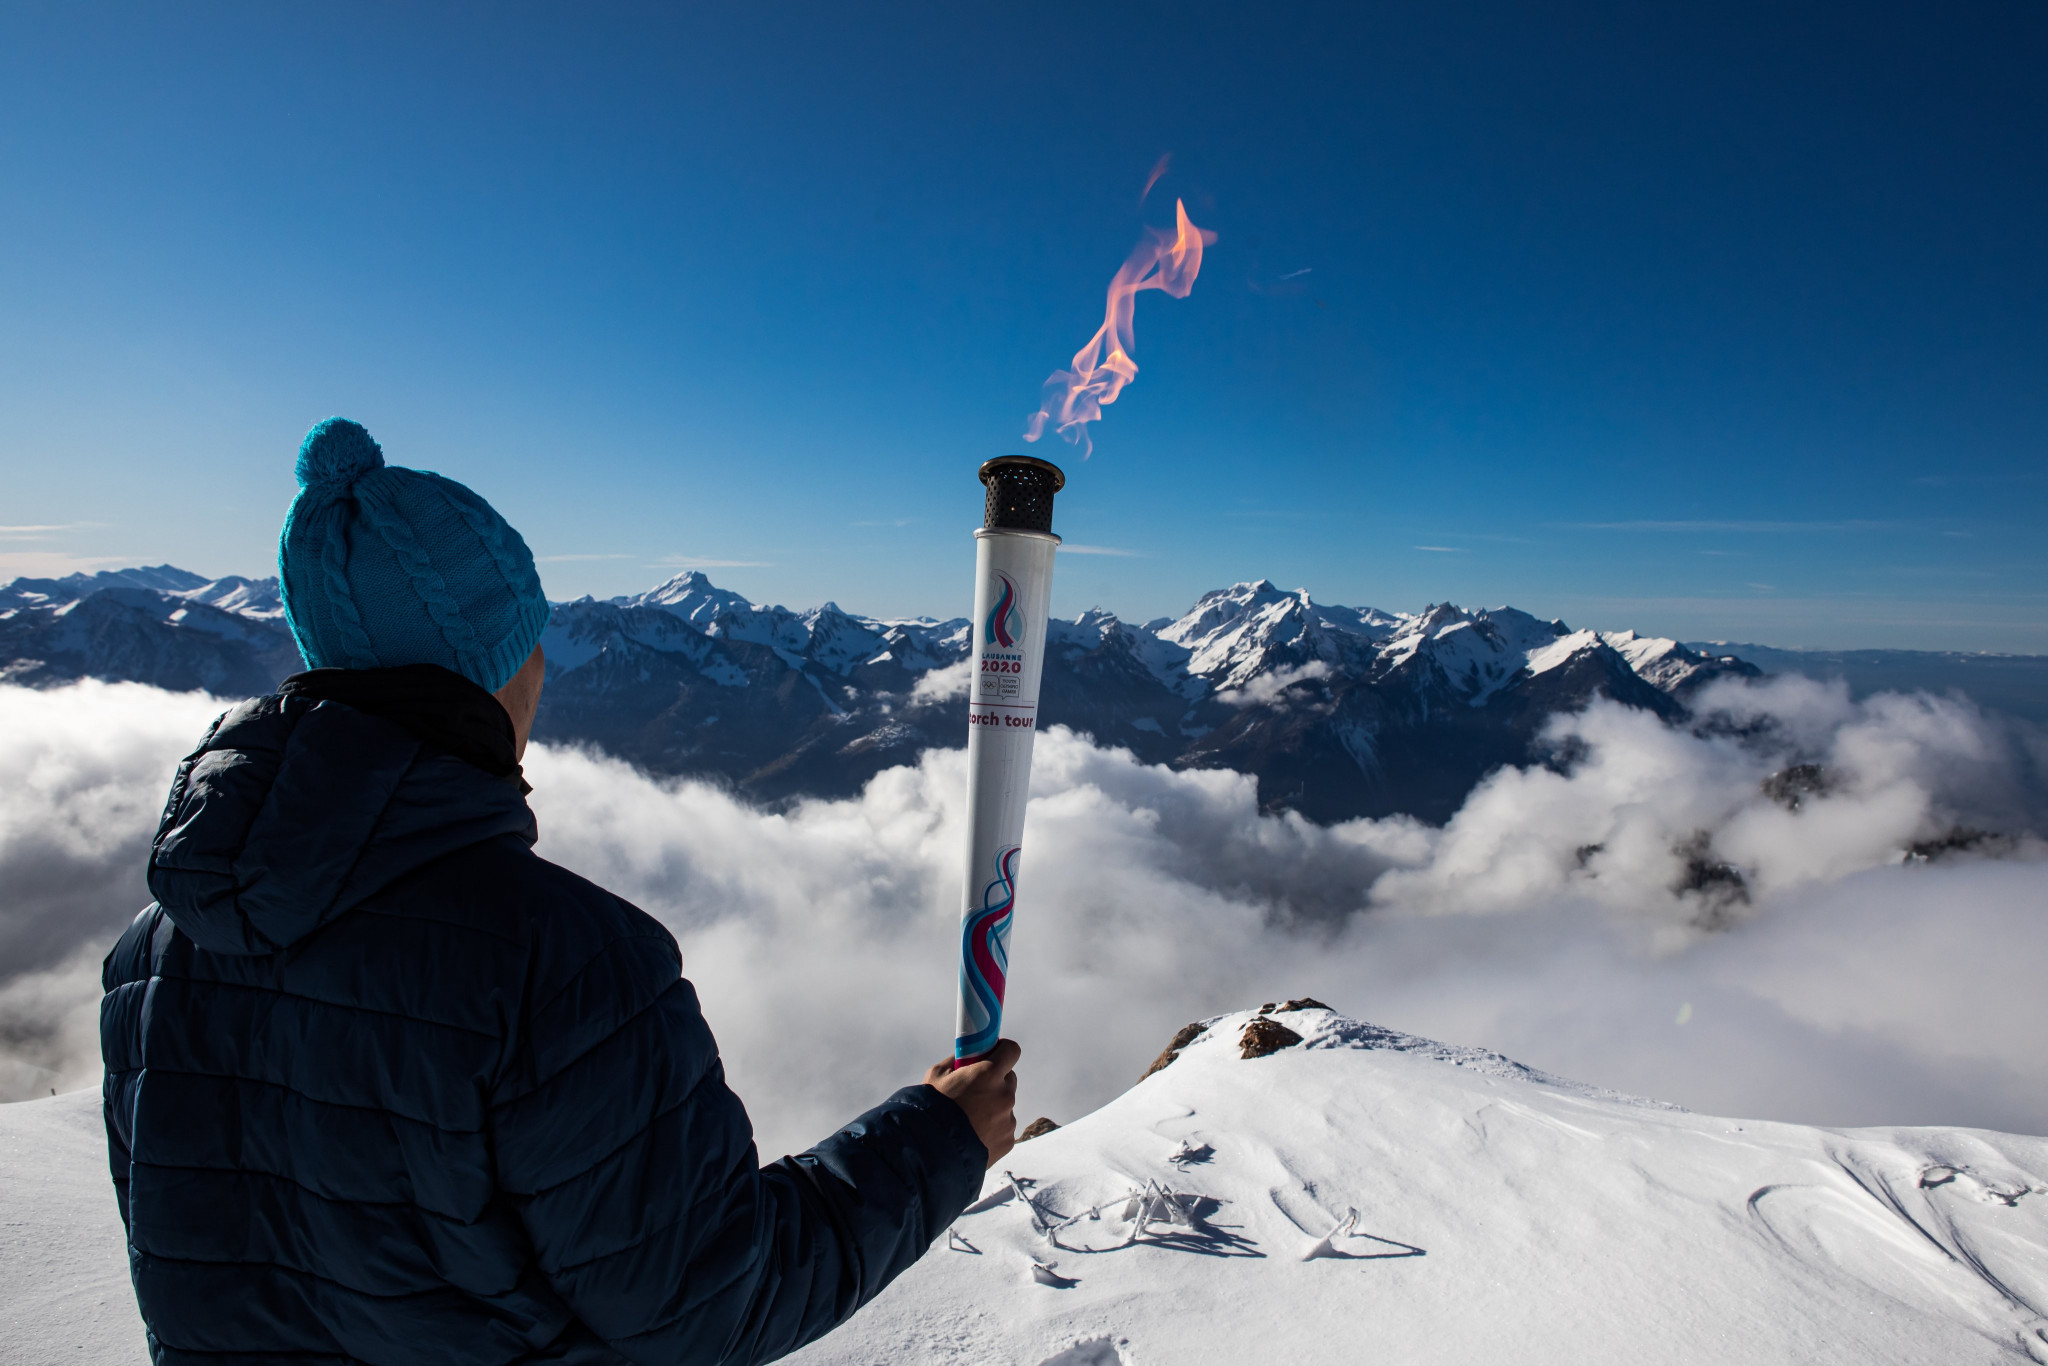 The Swiss Alps provided a breathtaking stop on the Lausanne 2020 Torch Relay ©Lausanne 2020